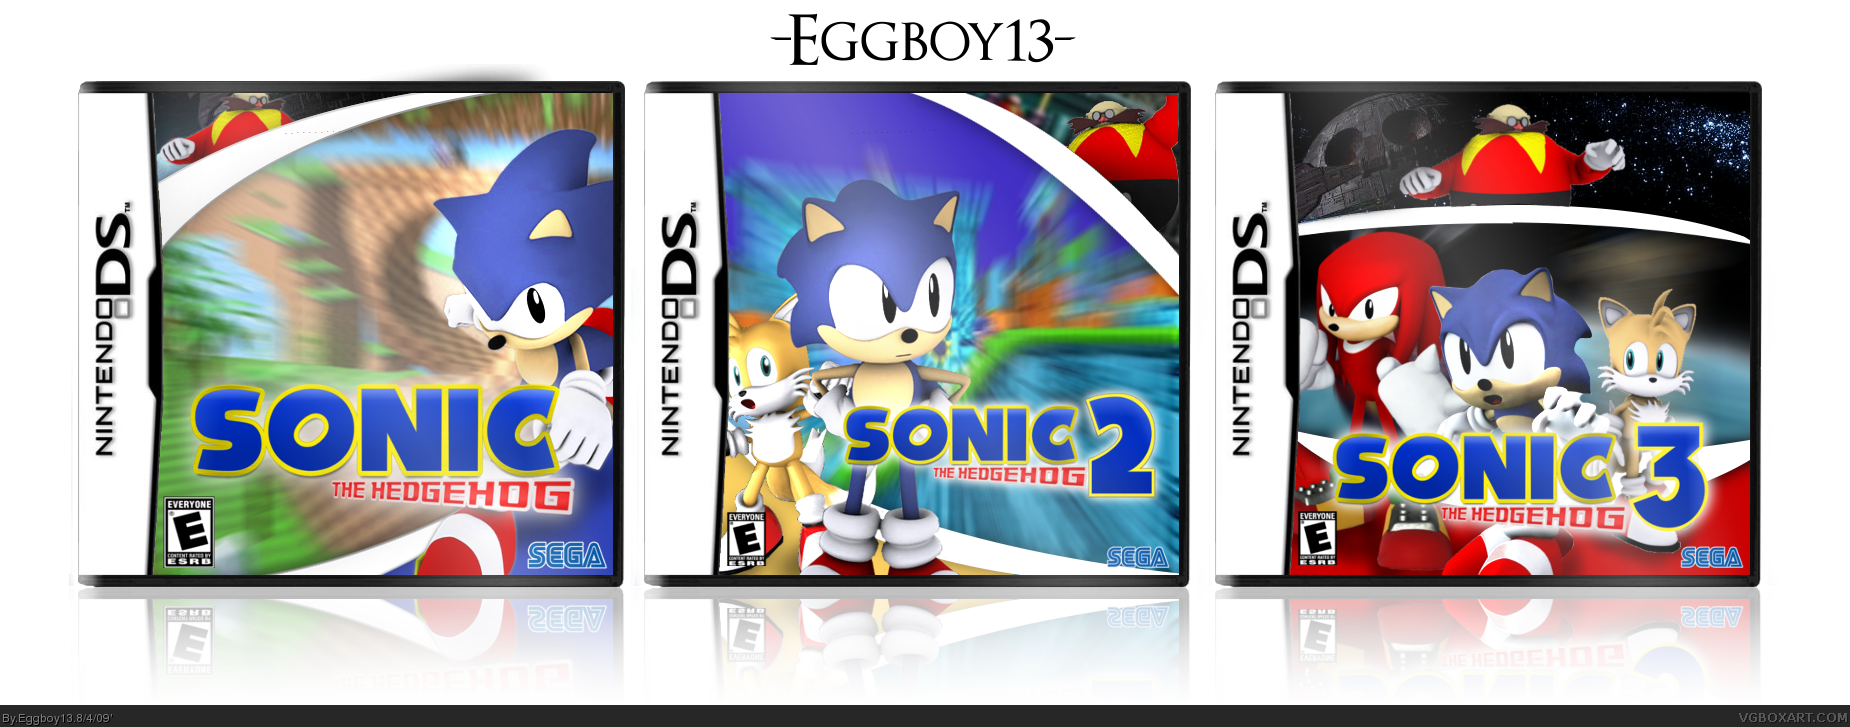 The Sonic The Hedgehog Remake Collection box cover